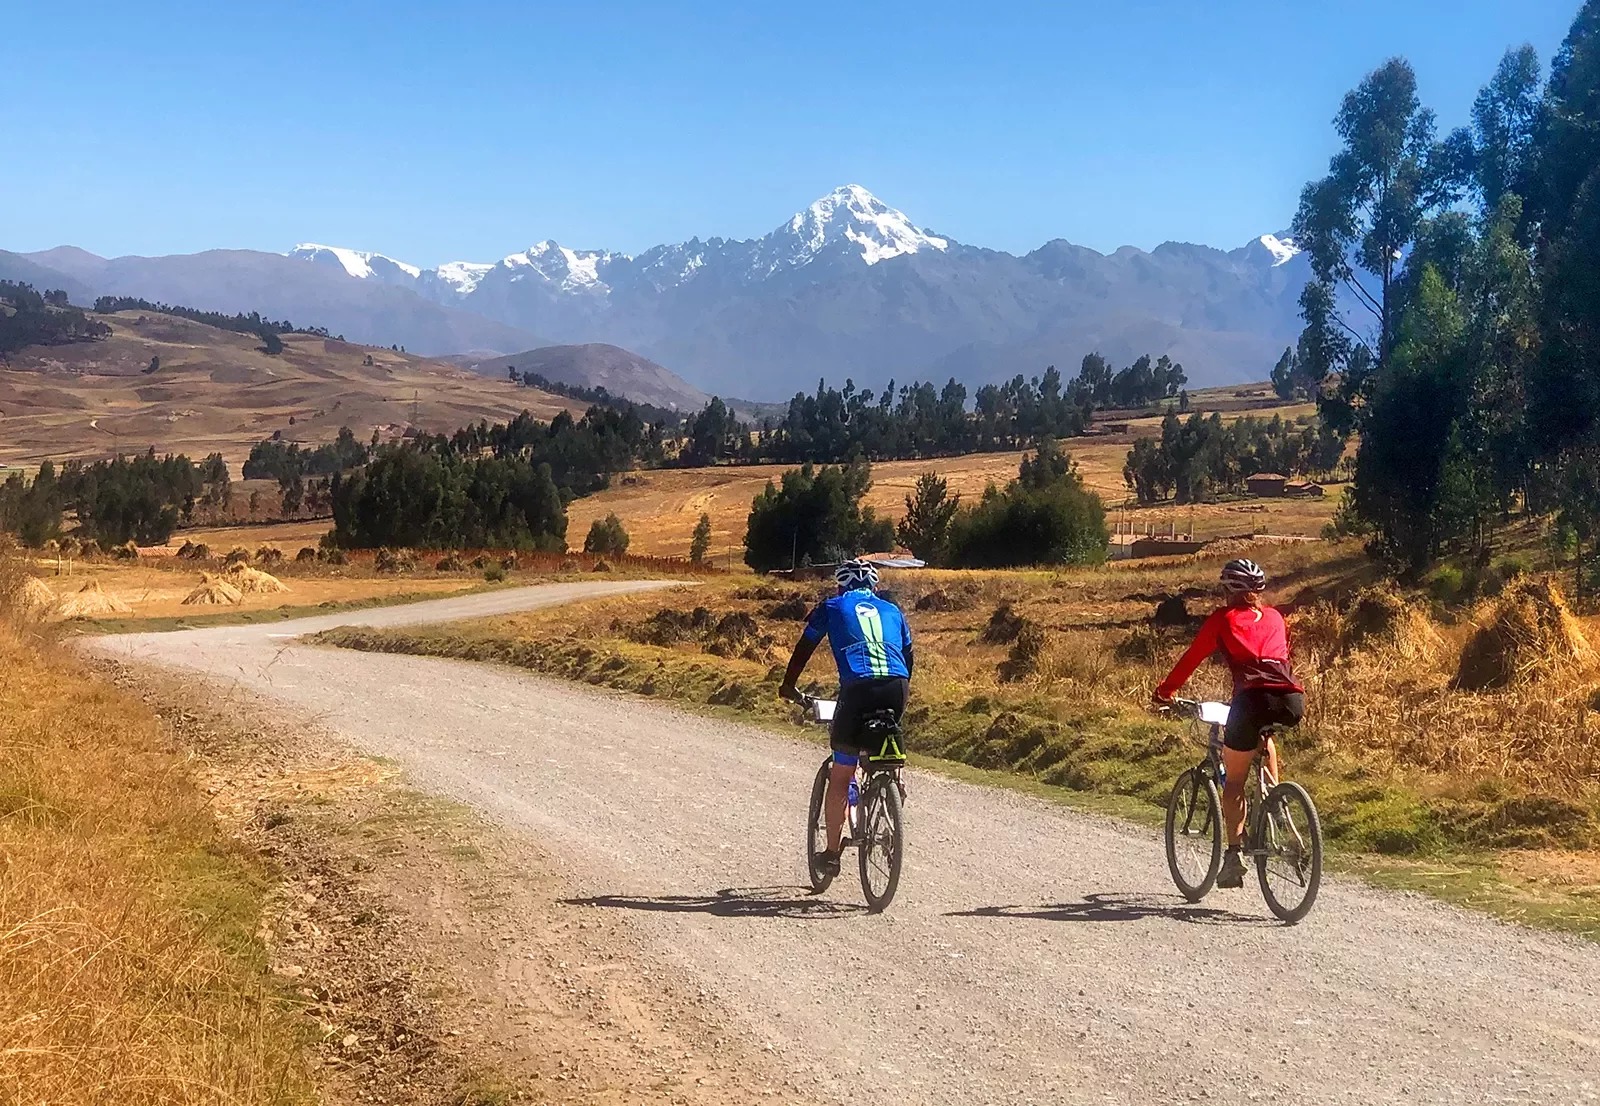 Two guests cycling down gravel road, golden grasses, trees, mountains in distance.